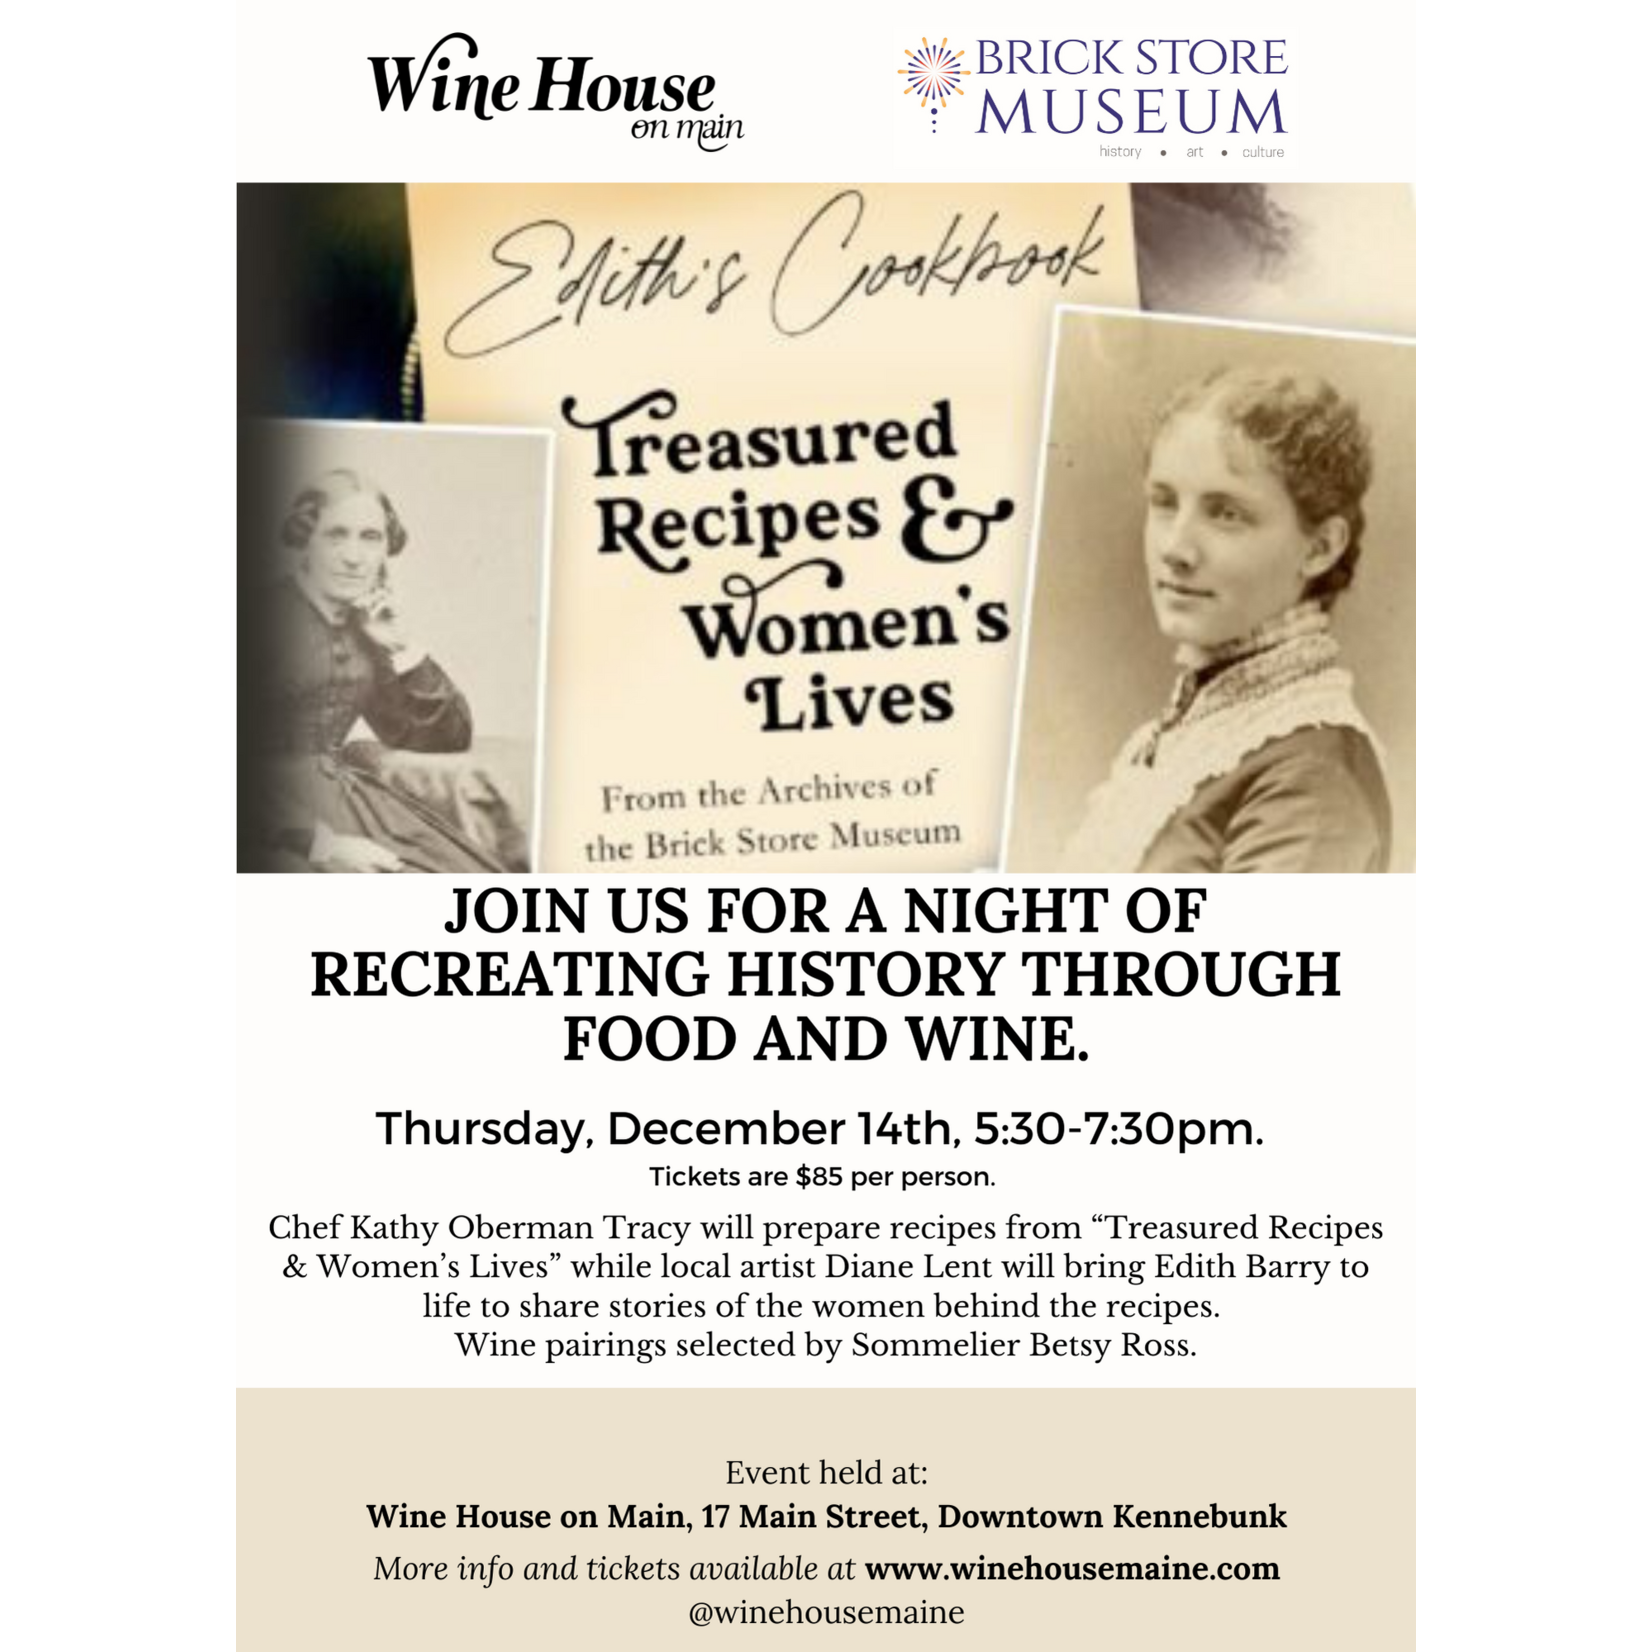 A Celebration of History, Food & Wine  w/ The Brick Store Museum, Thursday December 14th, 5:30-7:30pm